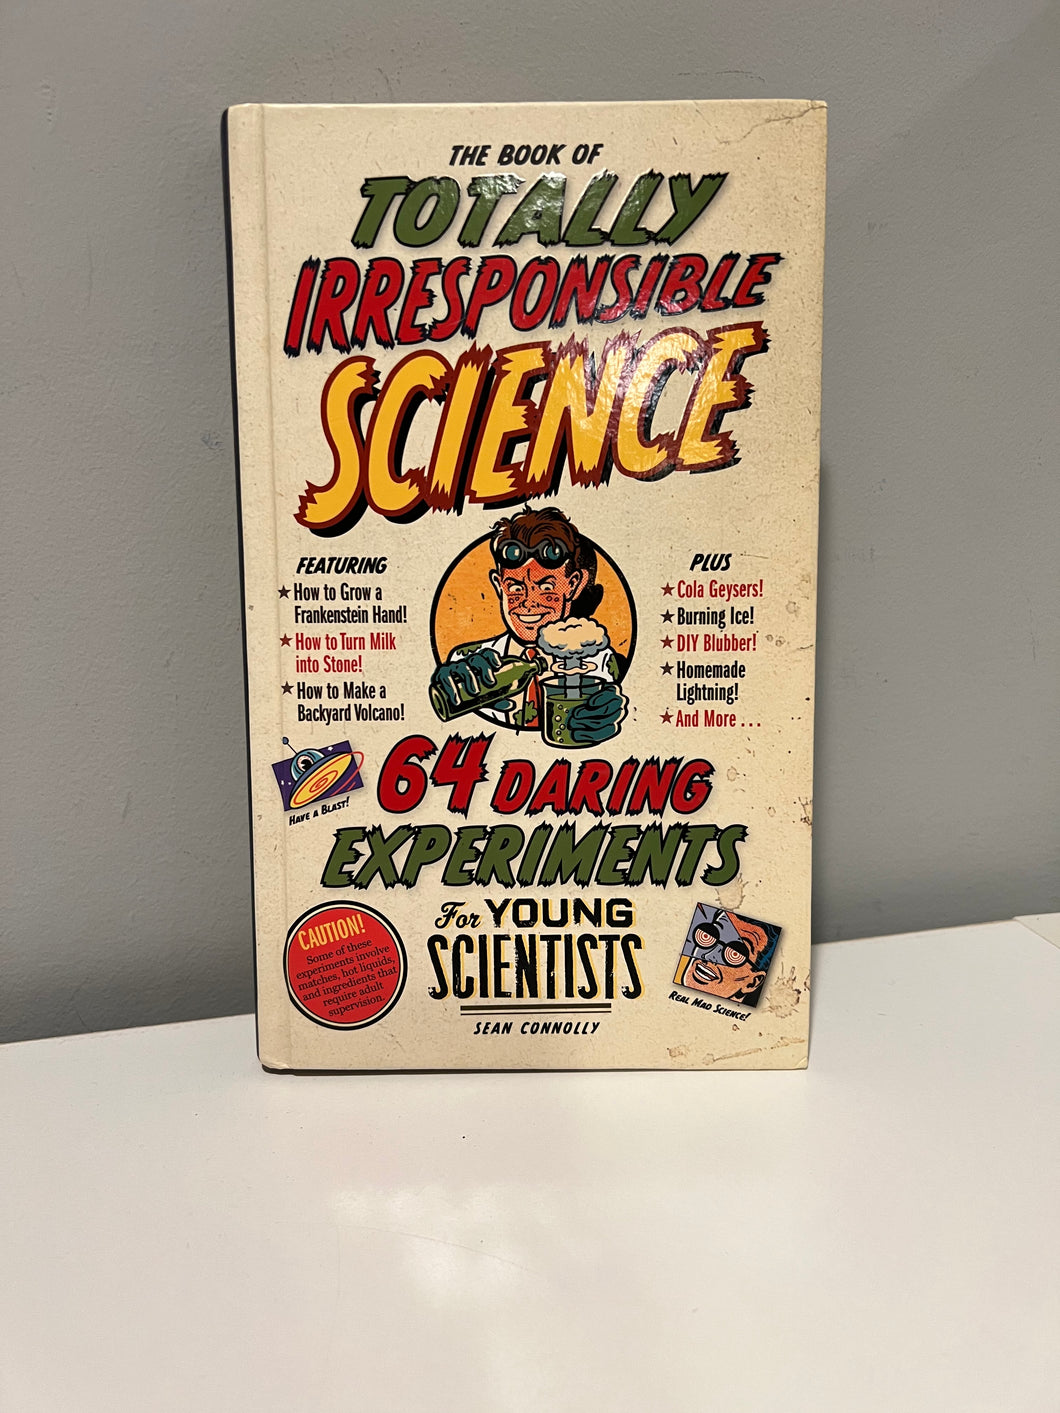 Totally irresponsible science hardback- experiments